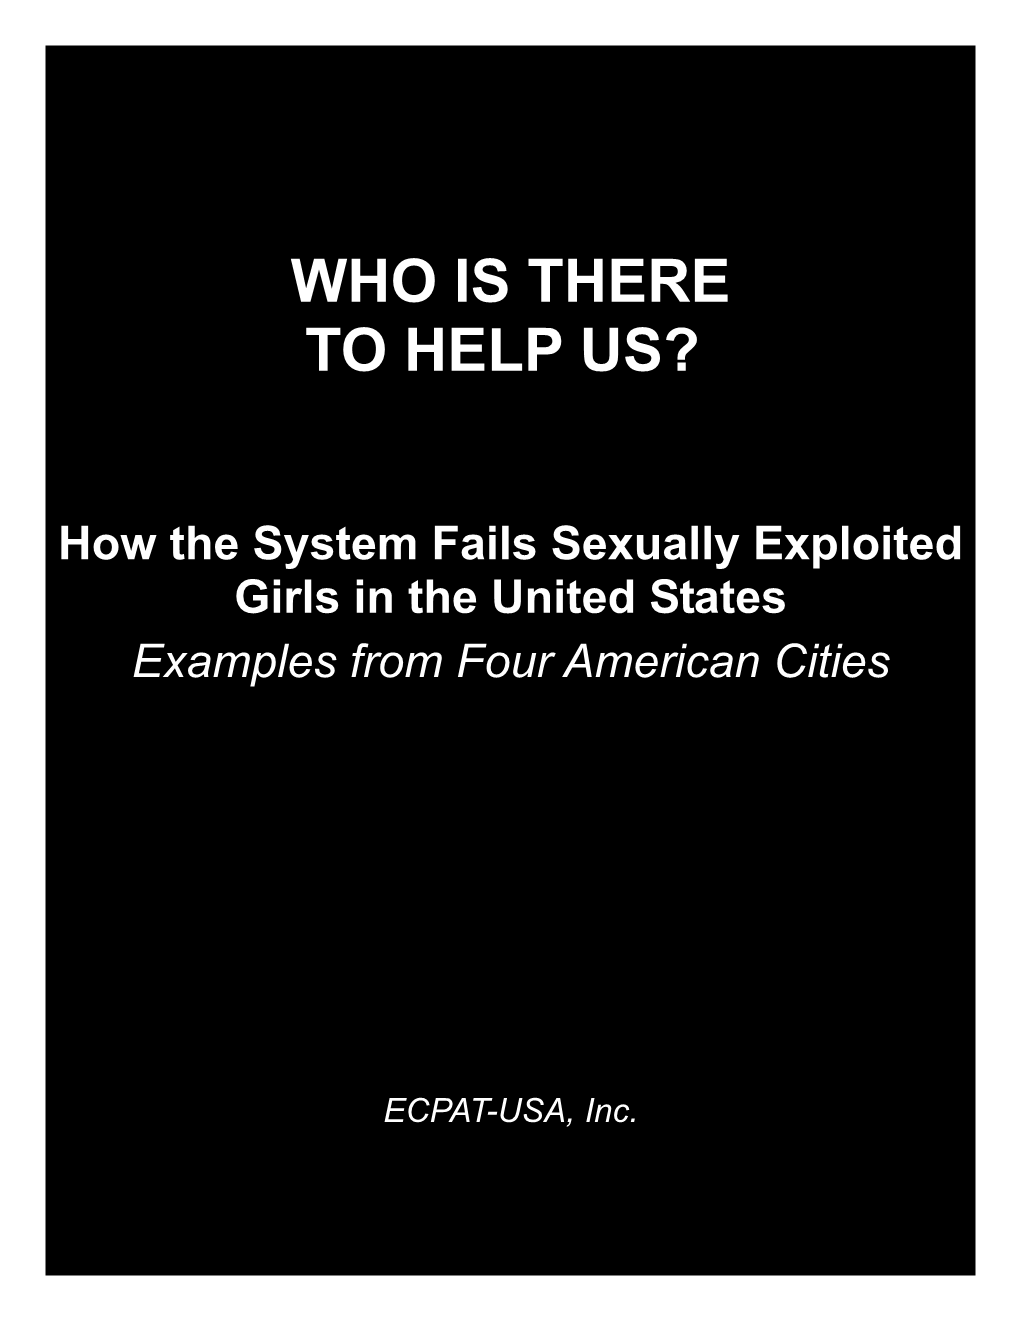 How the System Fails Sexually Exploited Girls in the United States Examples from Four American Cities